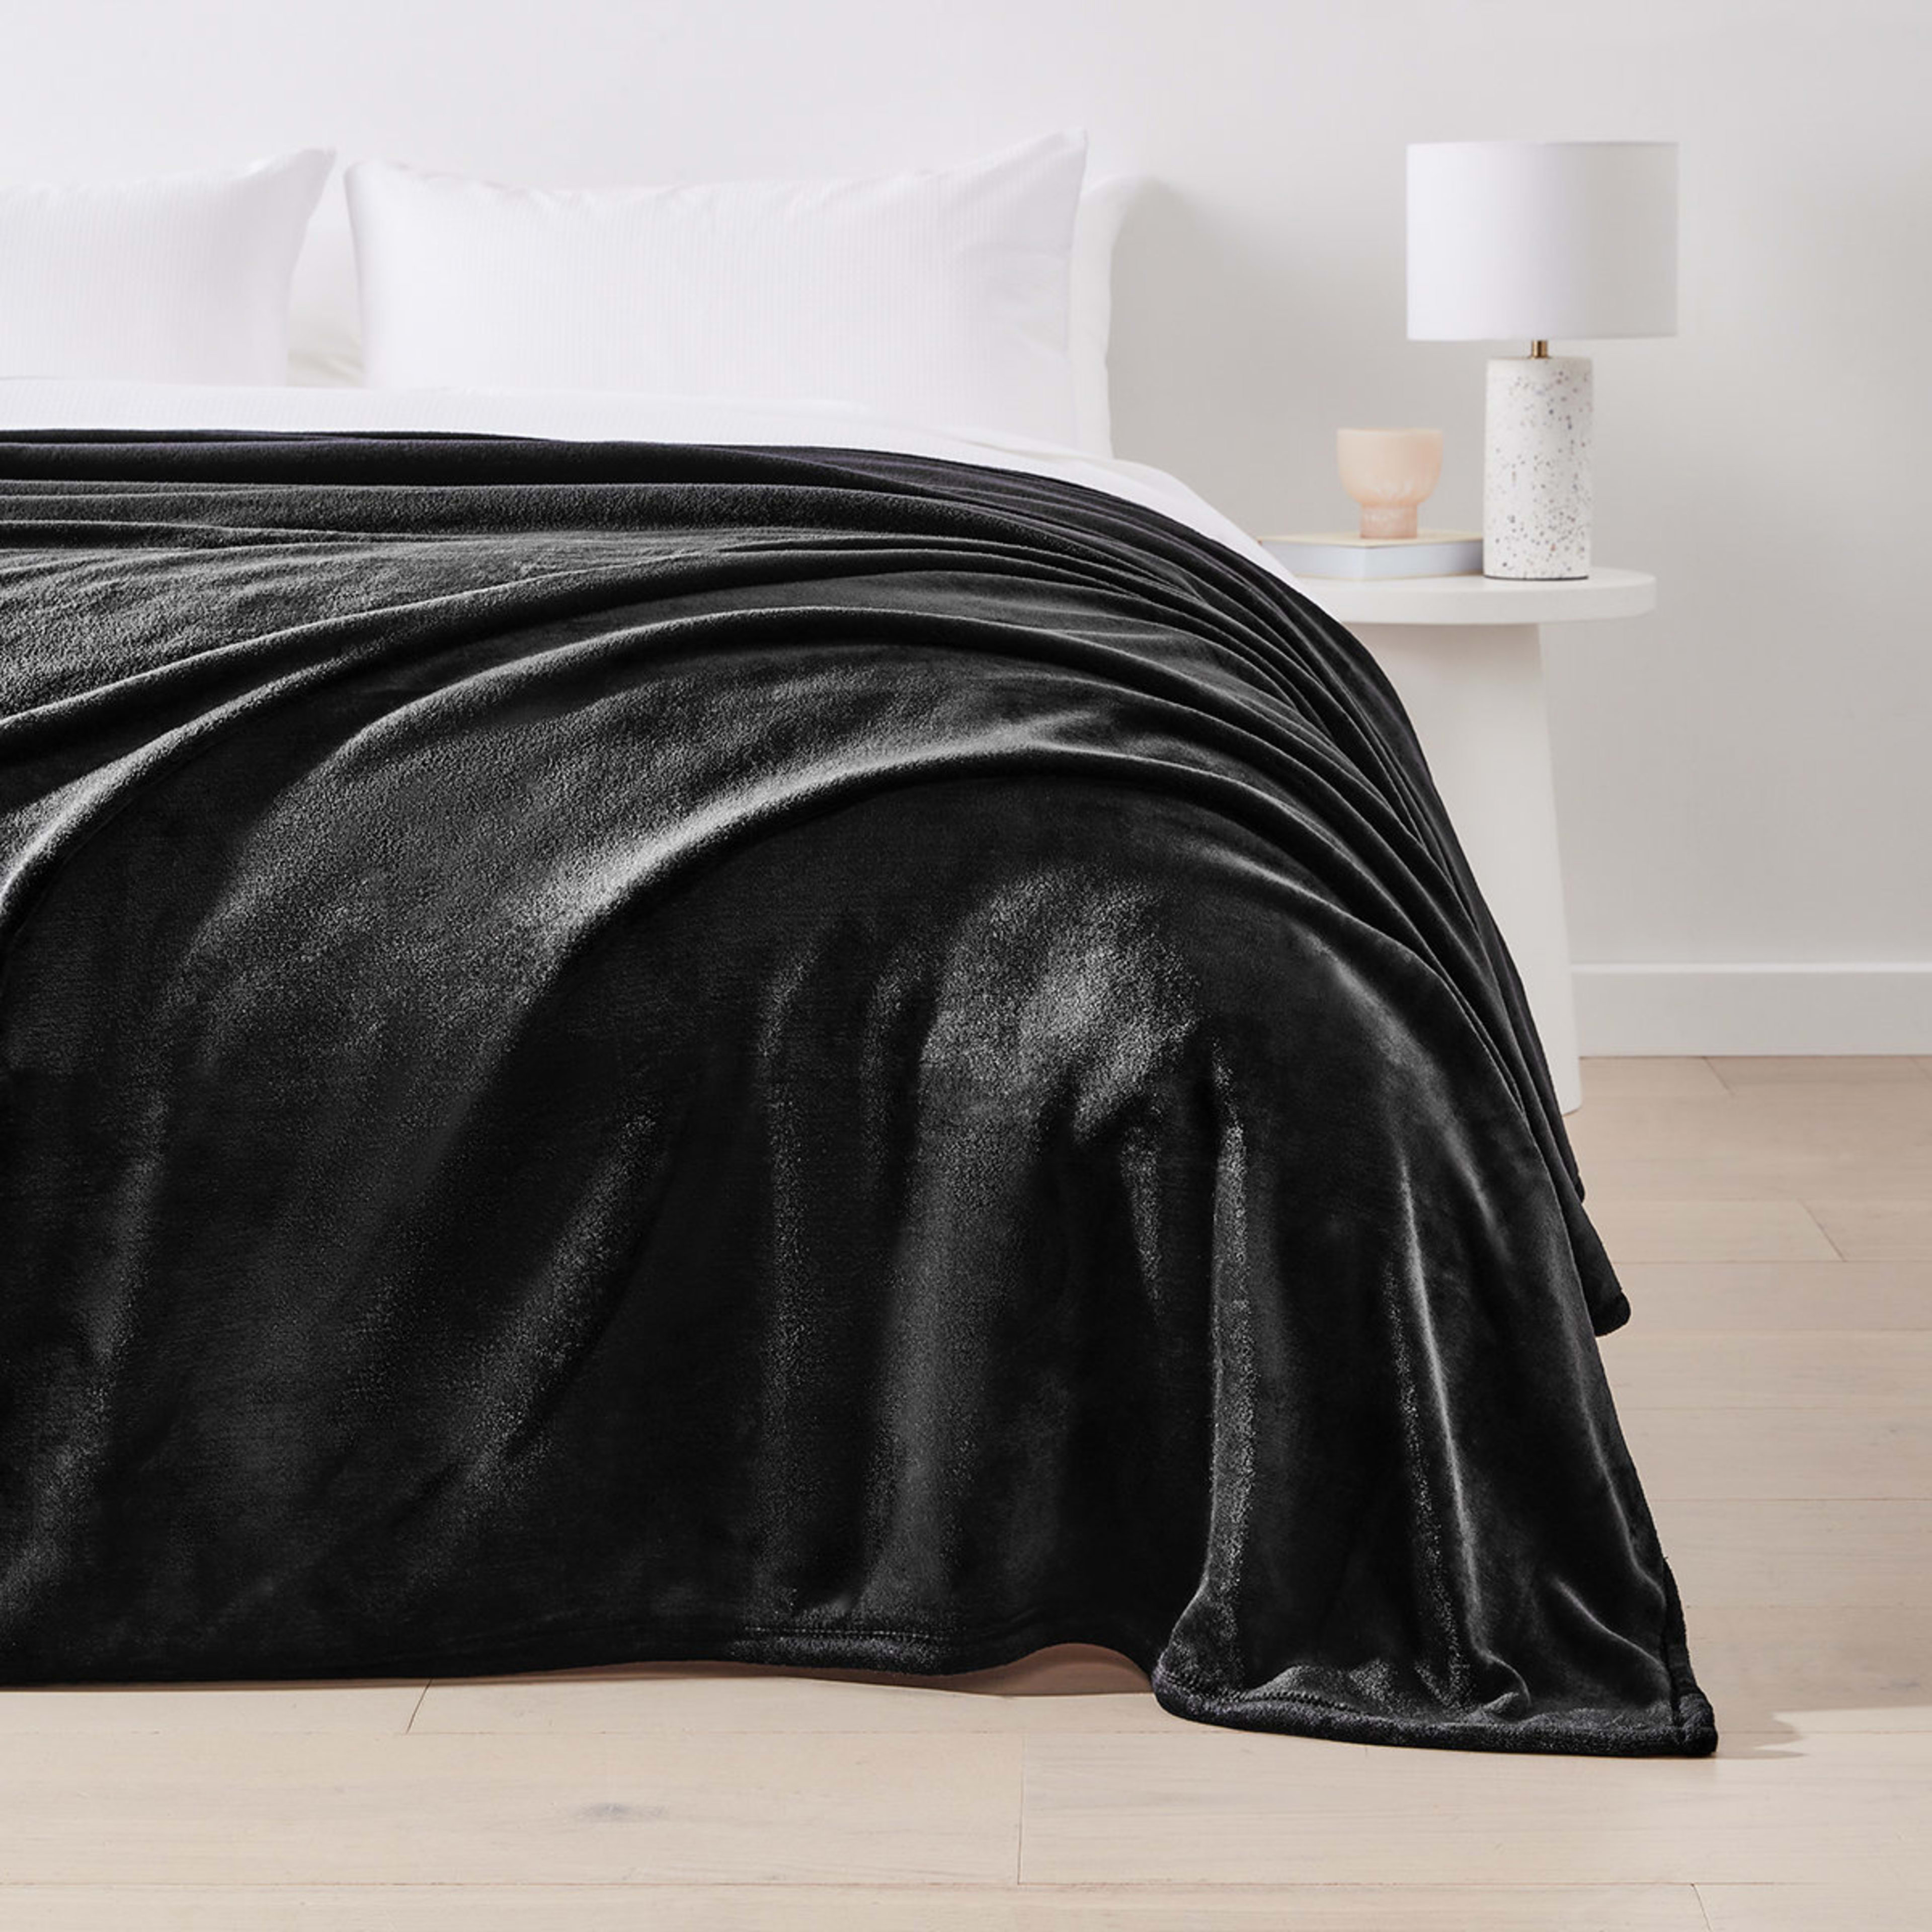 Soft Touch Blanket - Double/Queen Bed, Black